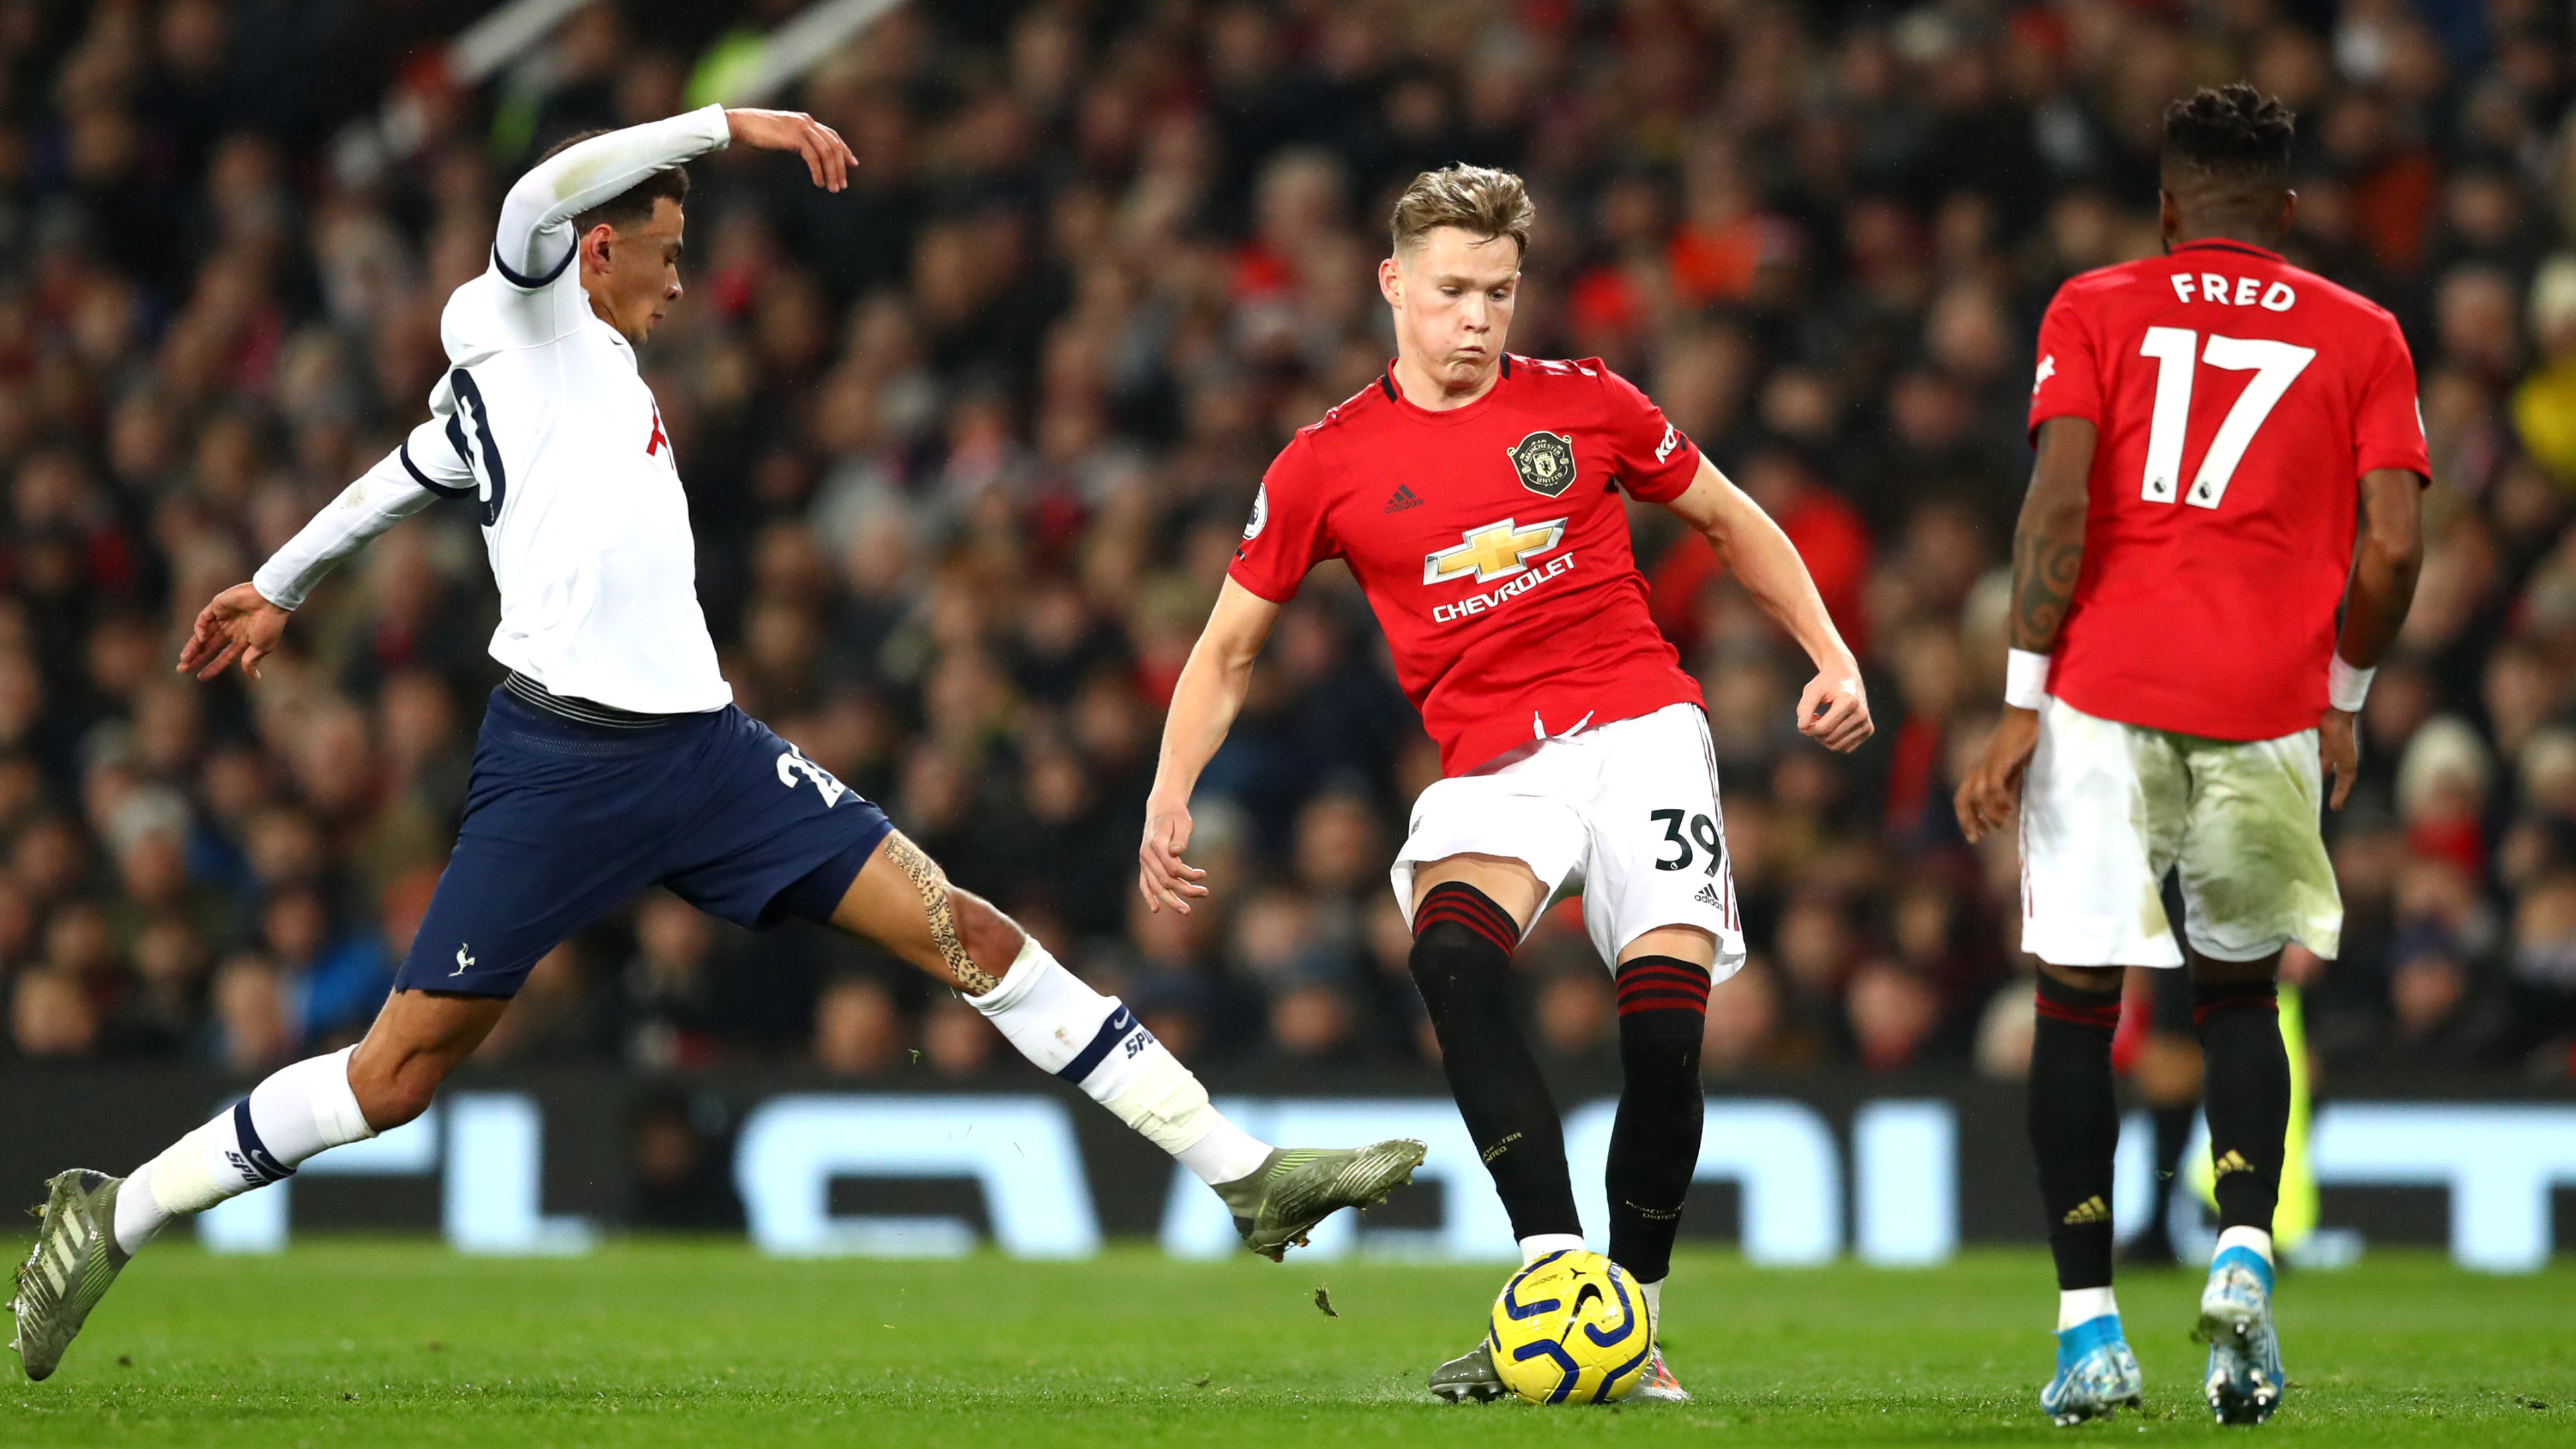 Kleberson reveals why Fred and Scott McTominay combine well at Manchester United - Bóng Đá